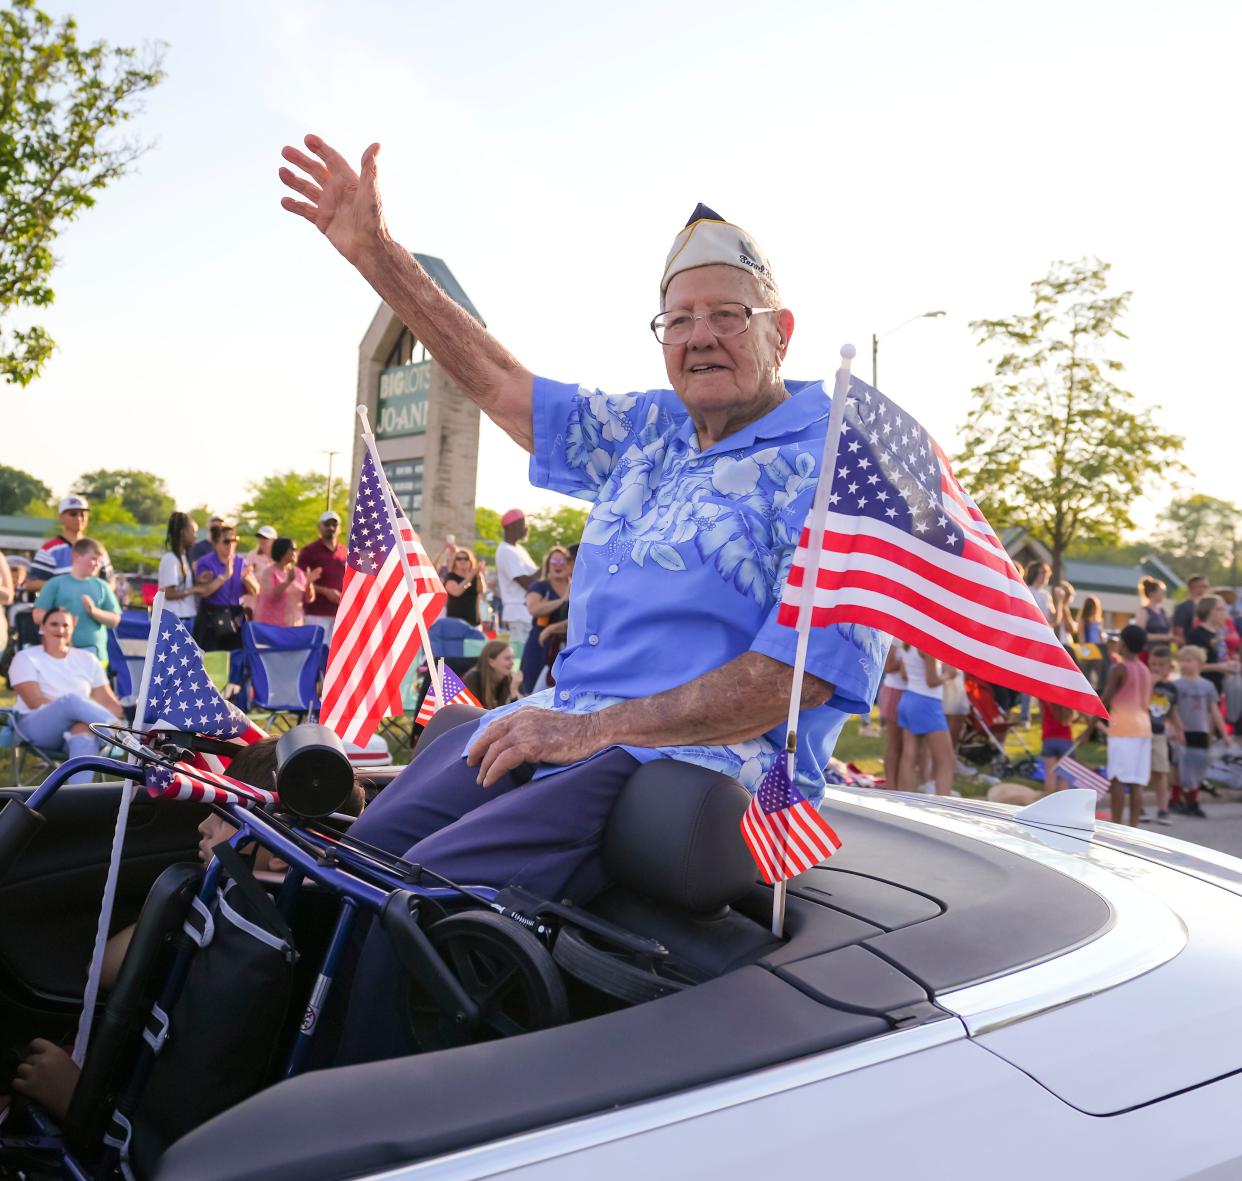 Pearl Harbor survivor Edward Miklavcic, a veteran of the then U.S. Army Air Forces, rides in the annual Menomonee Falls Independence Day parade on Sunday, July 3, 2022.